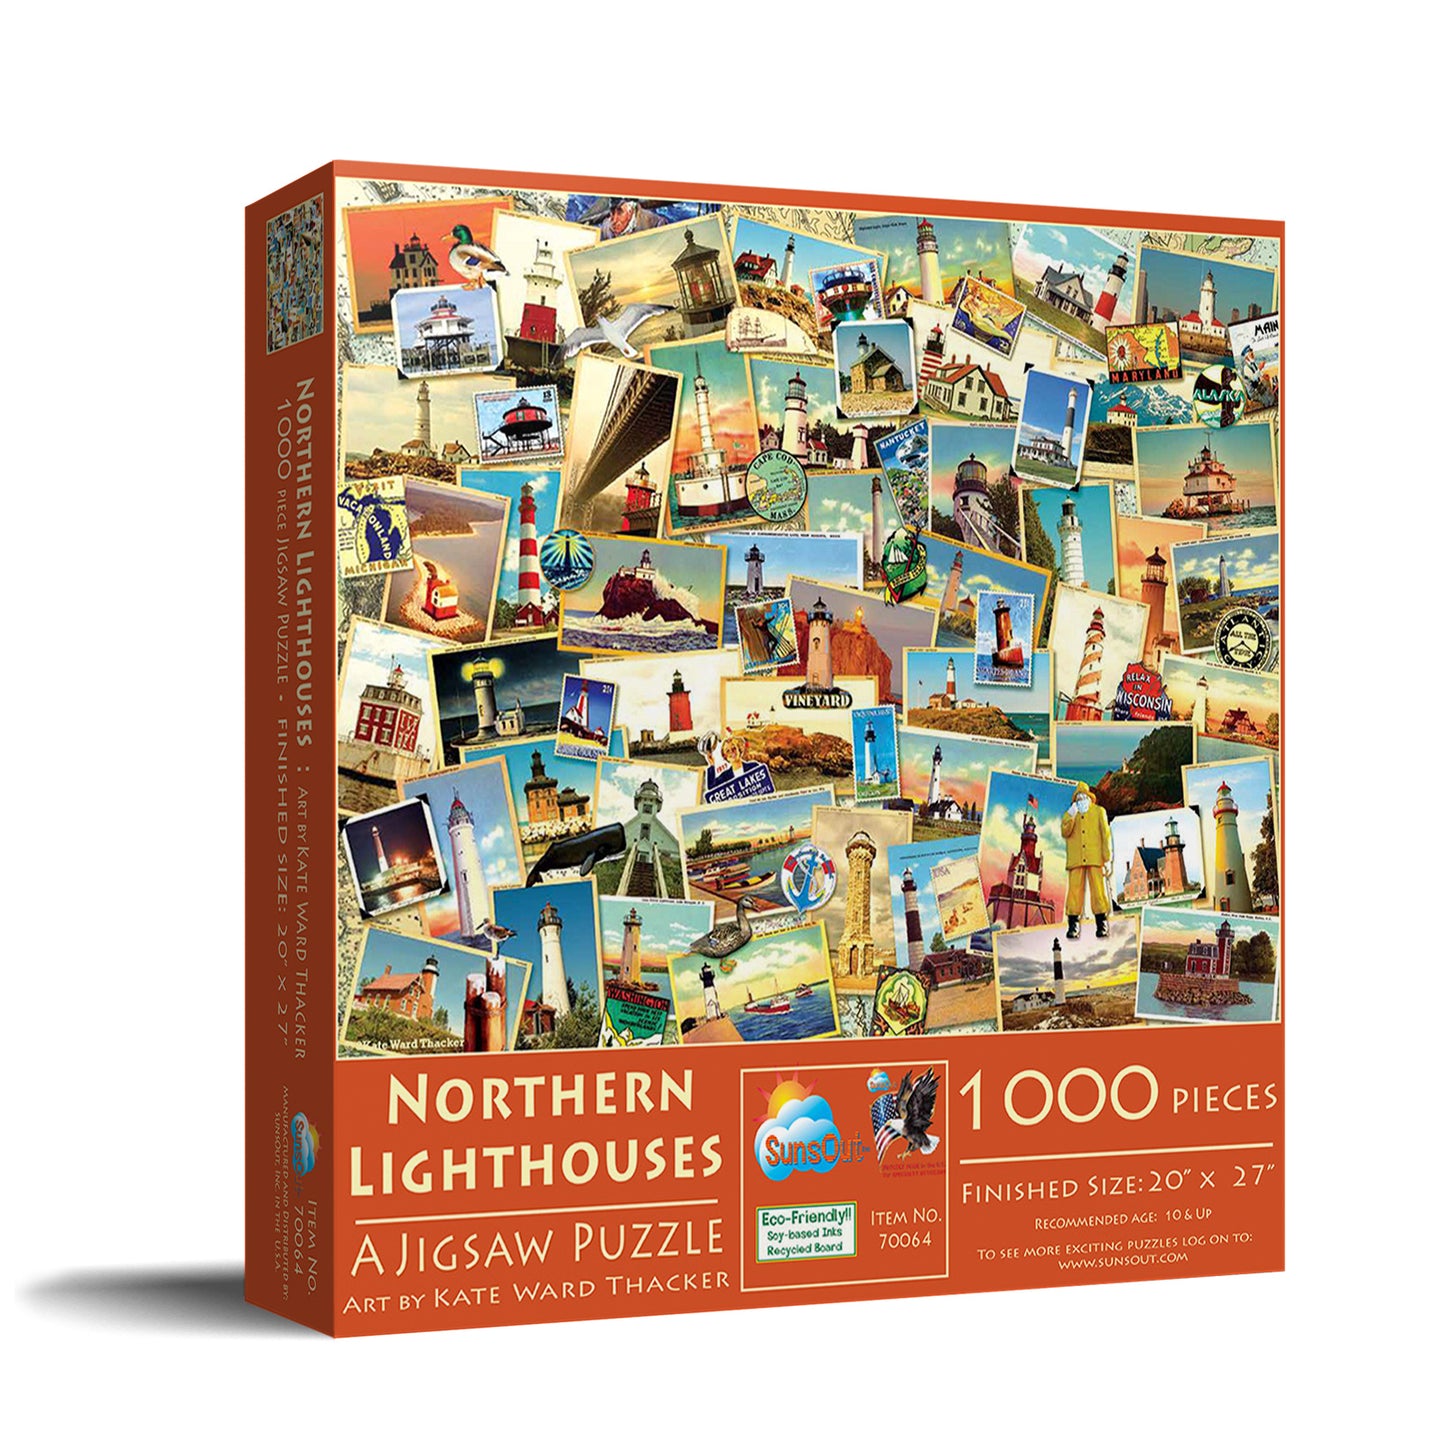 Northern Lighthouses - 1000 Piece Jigsaw Puzzle